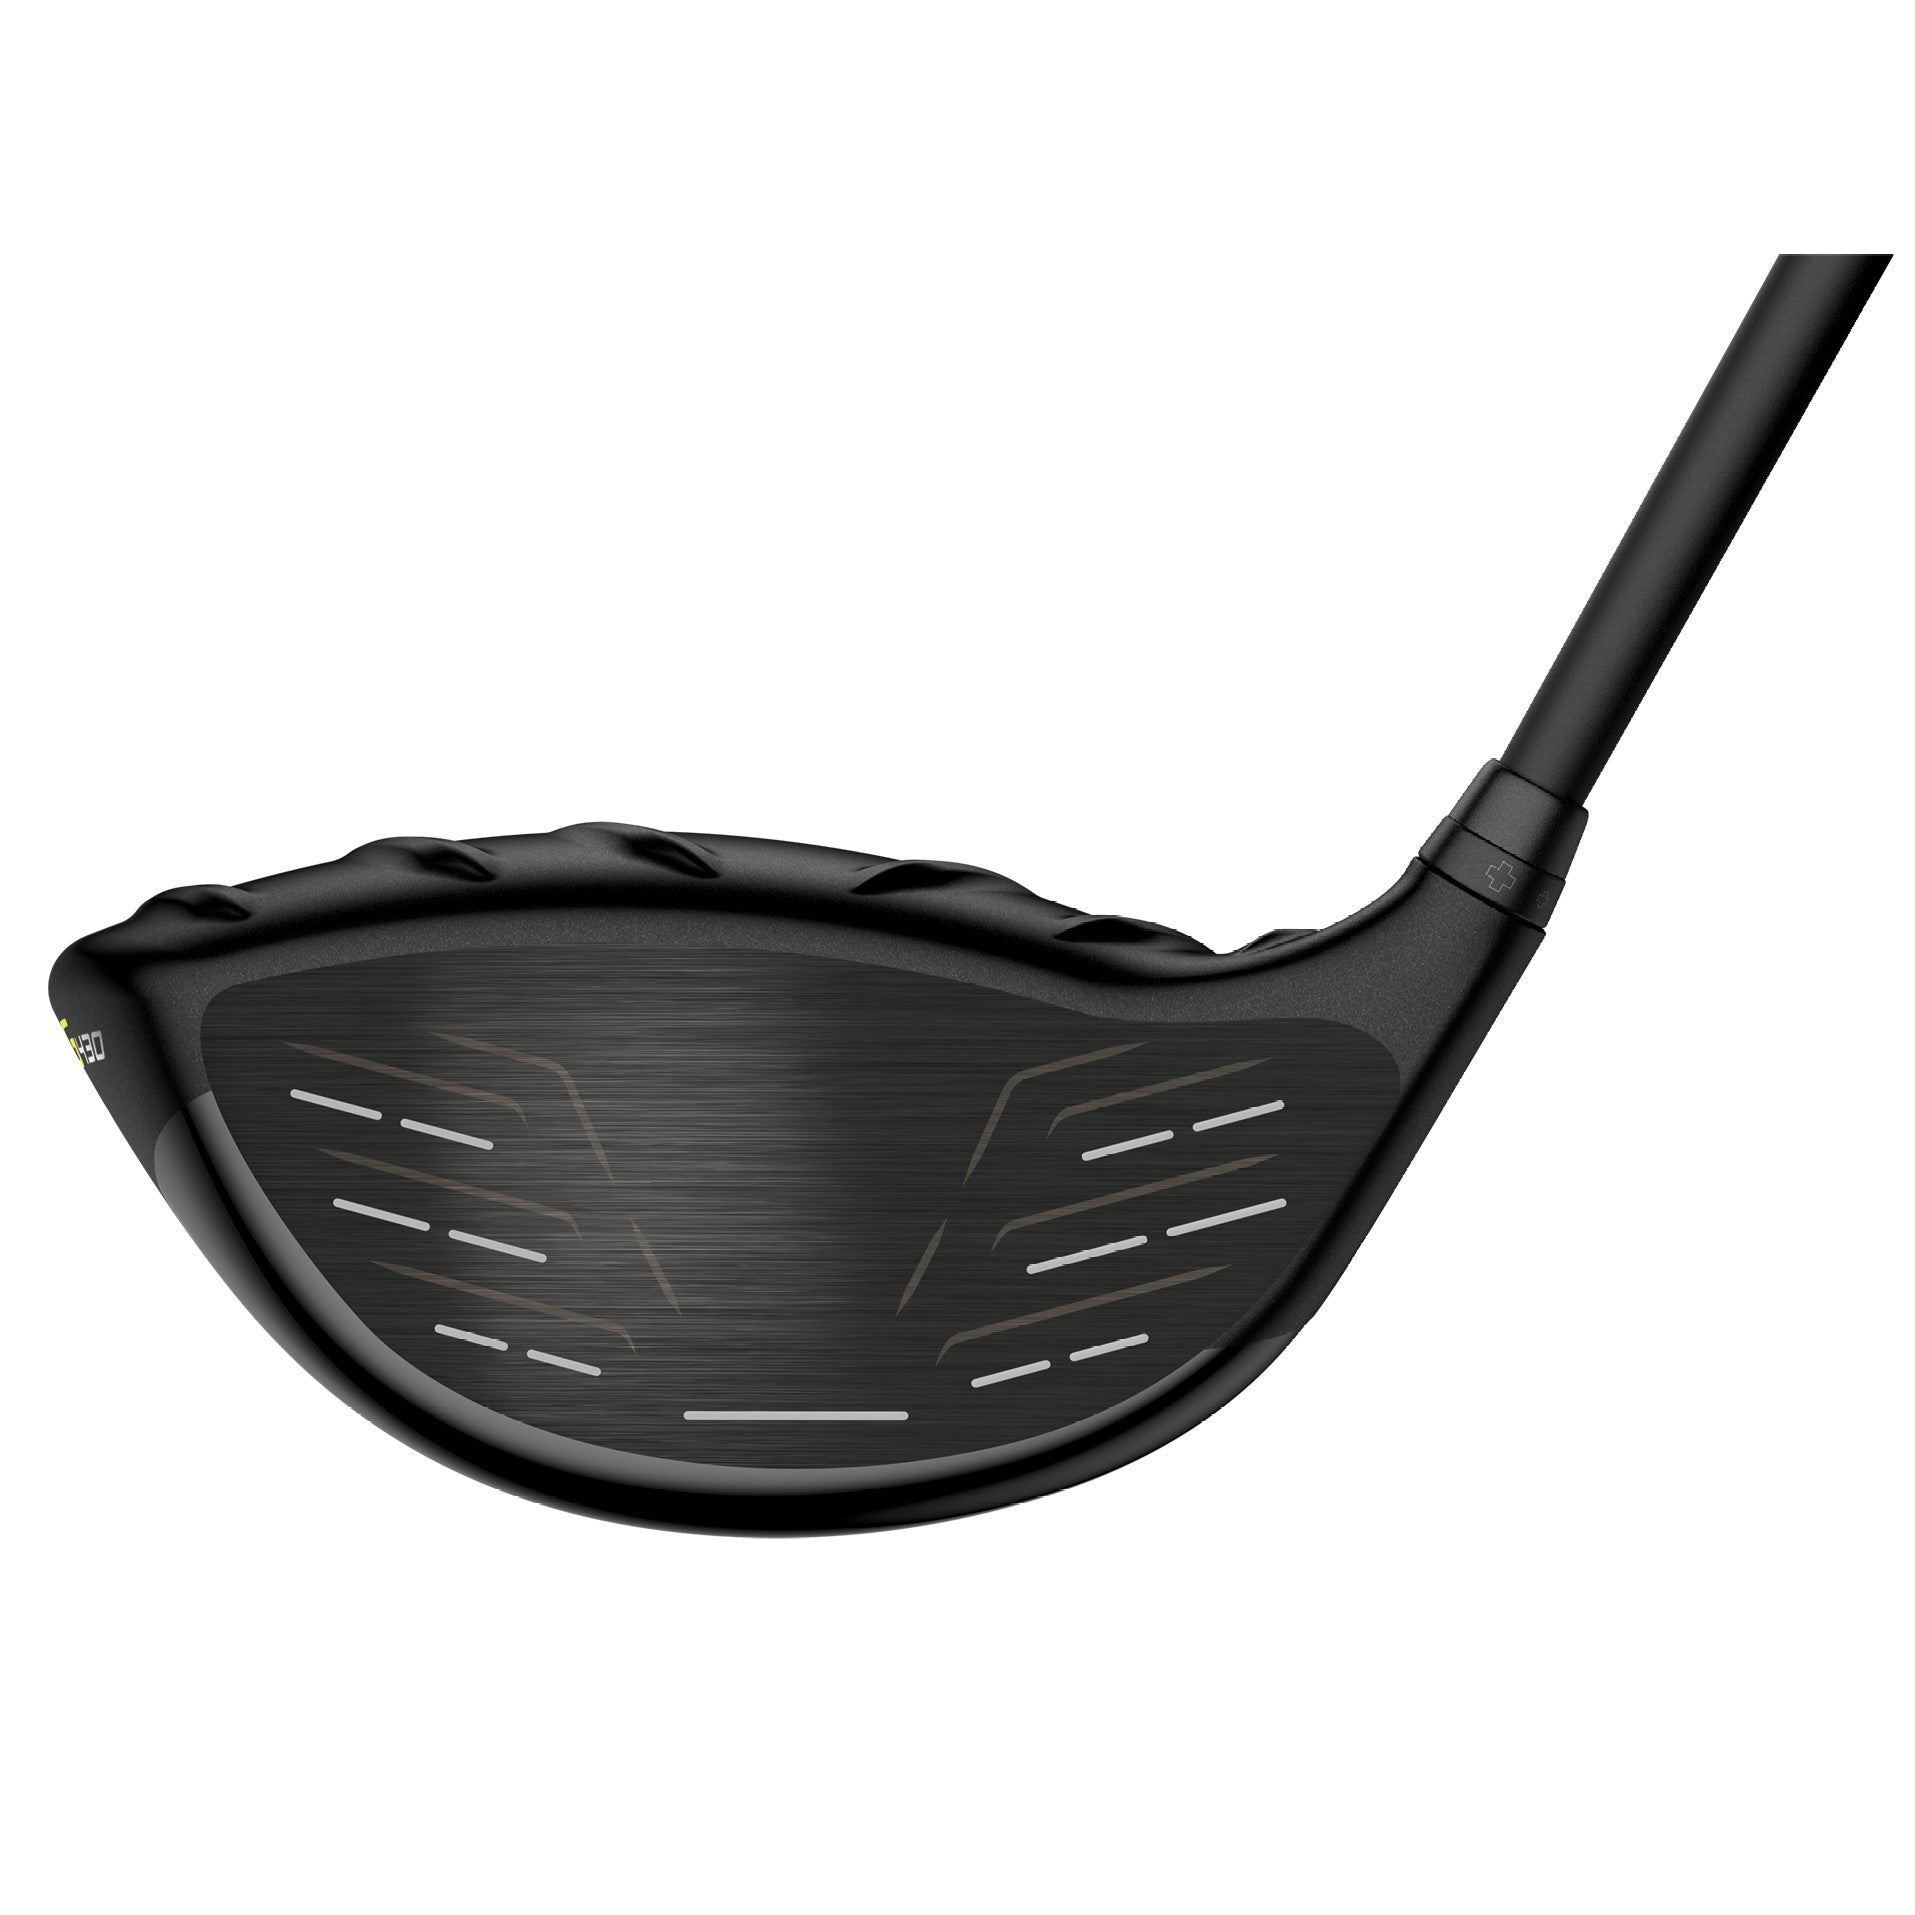 Ping G430 SFT Driver Mens Right Hand